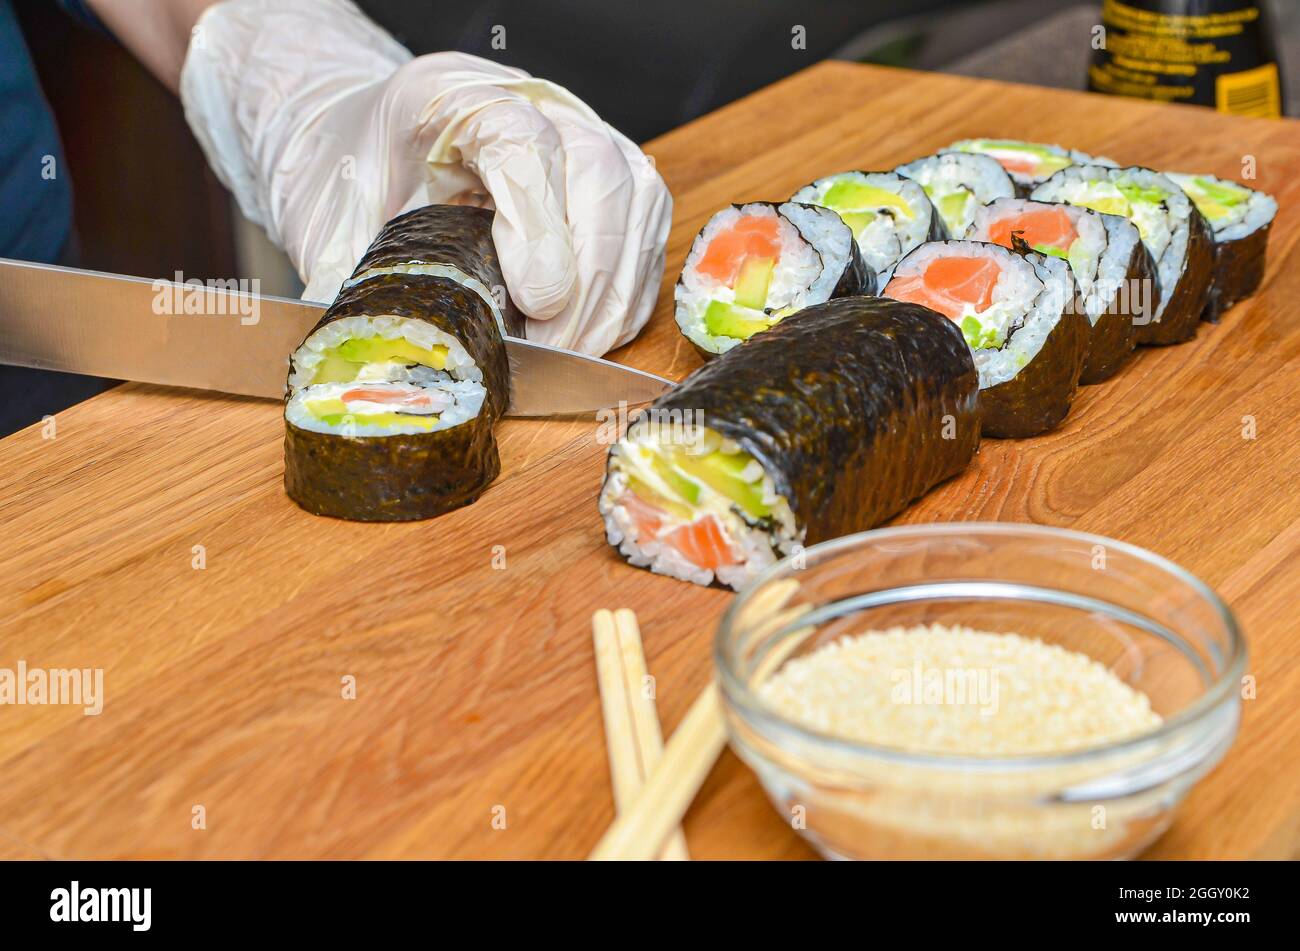 https://c8.alamy.com/comp/2GGY0K2/the-process-of-making-japanese-sushi-knife-in-hand-cuts-a-roll-close-up-on-a-wooden-board-2GGY0K2.jpg